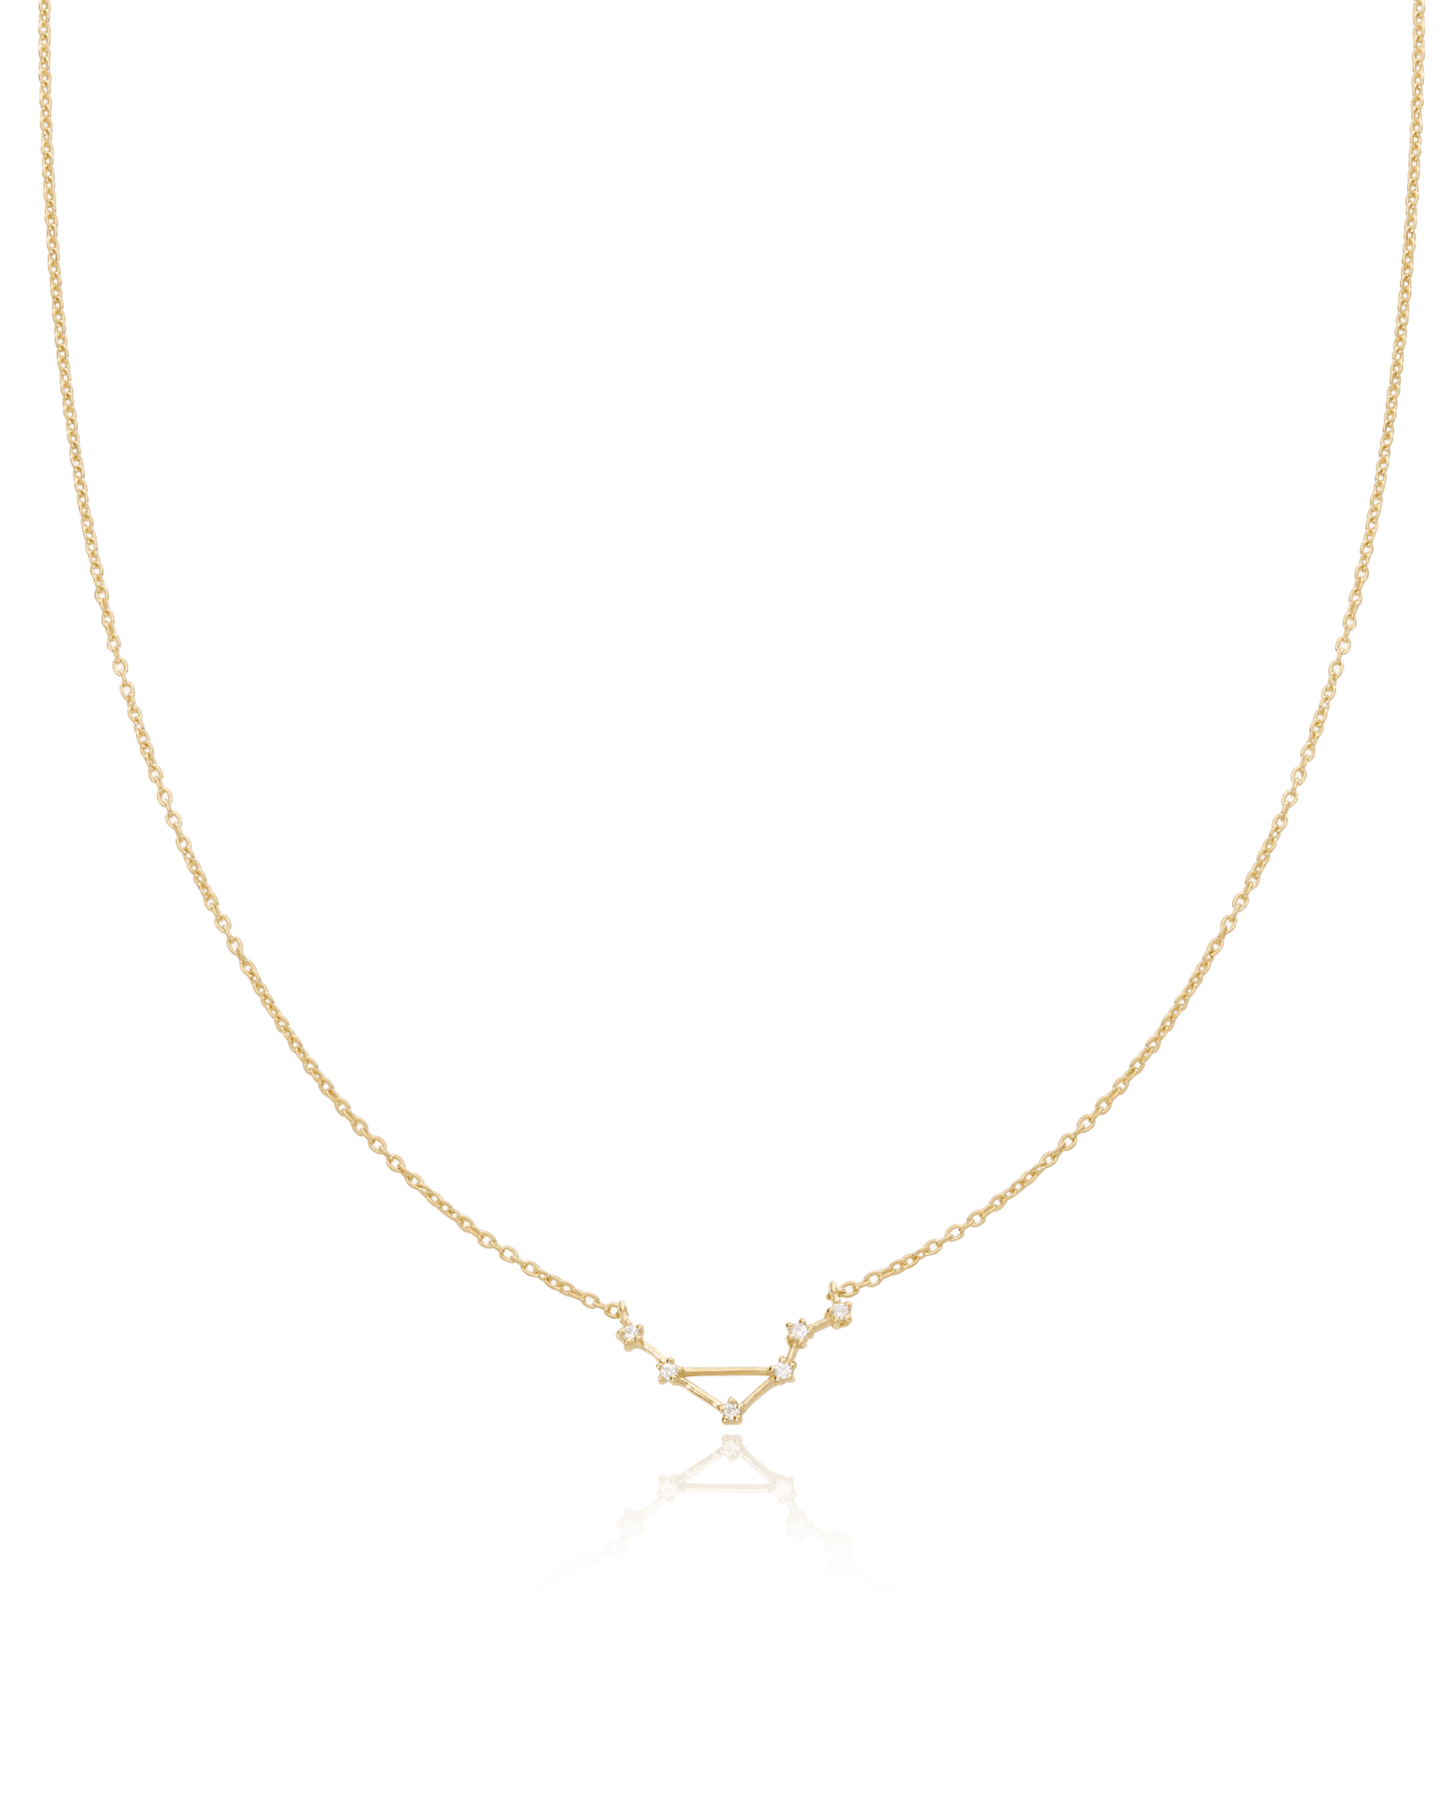 Single Constellation Necklace with Diamonds - 925 Sterling Silver Necklaces magal-dev Aquarius (January 20 – February 18) 16" 